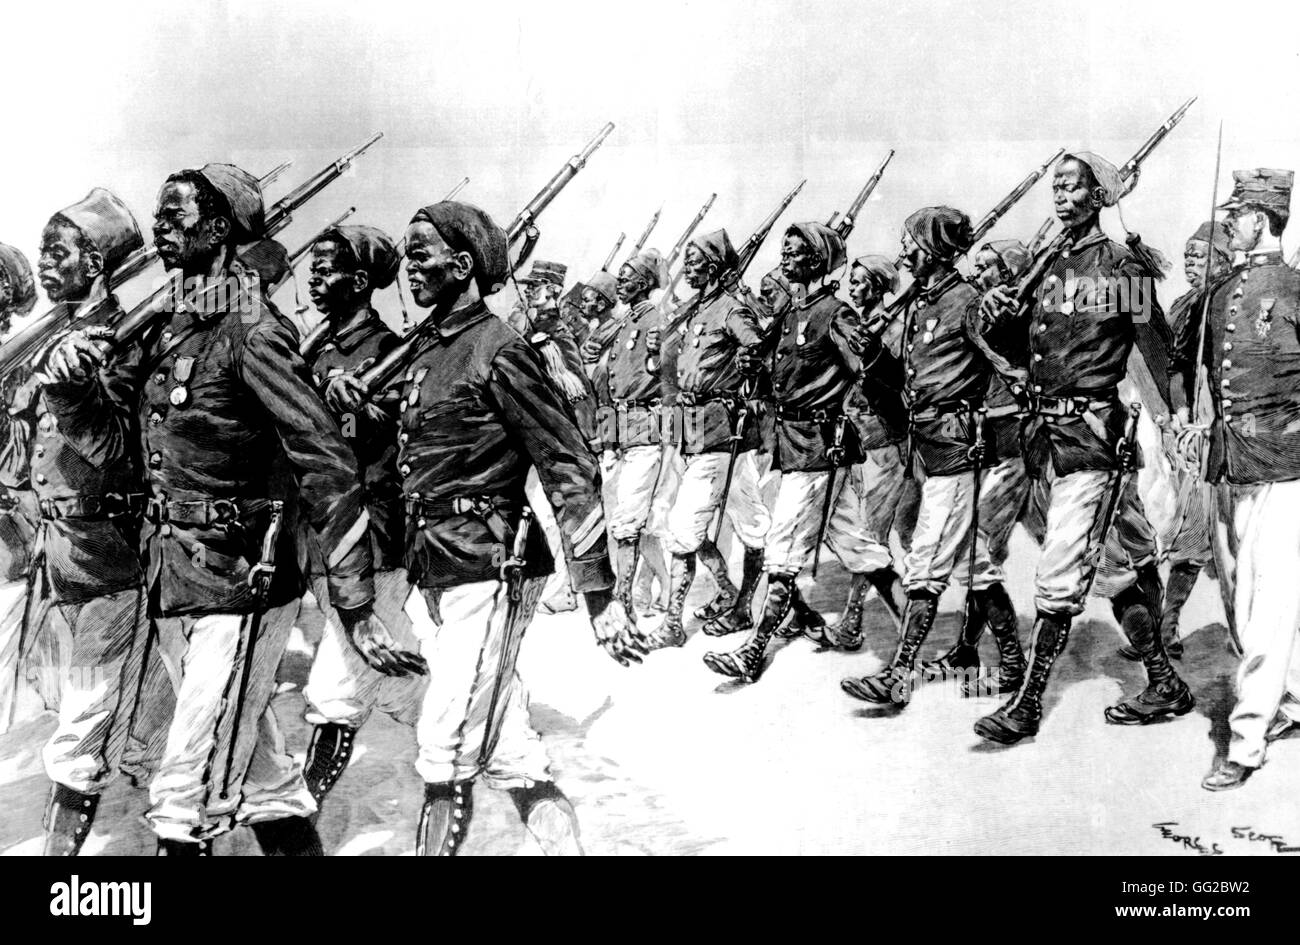 Senegalese infantrymen of the Marchand Expedition July 1899 France - Colonization Stock Photo